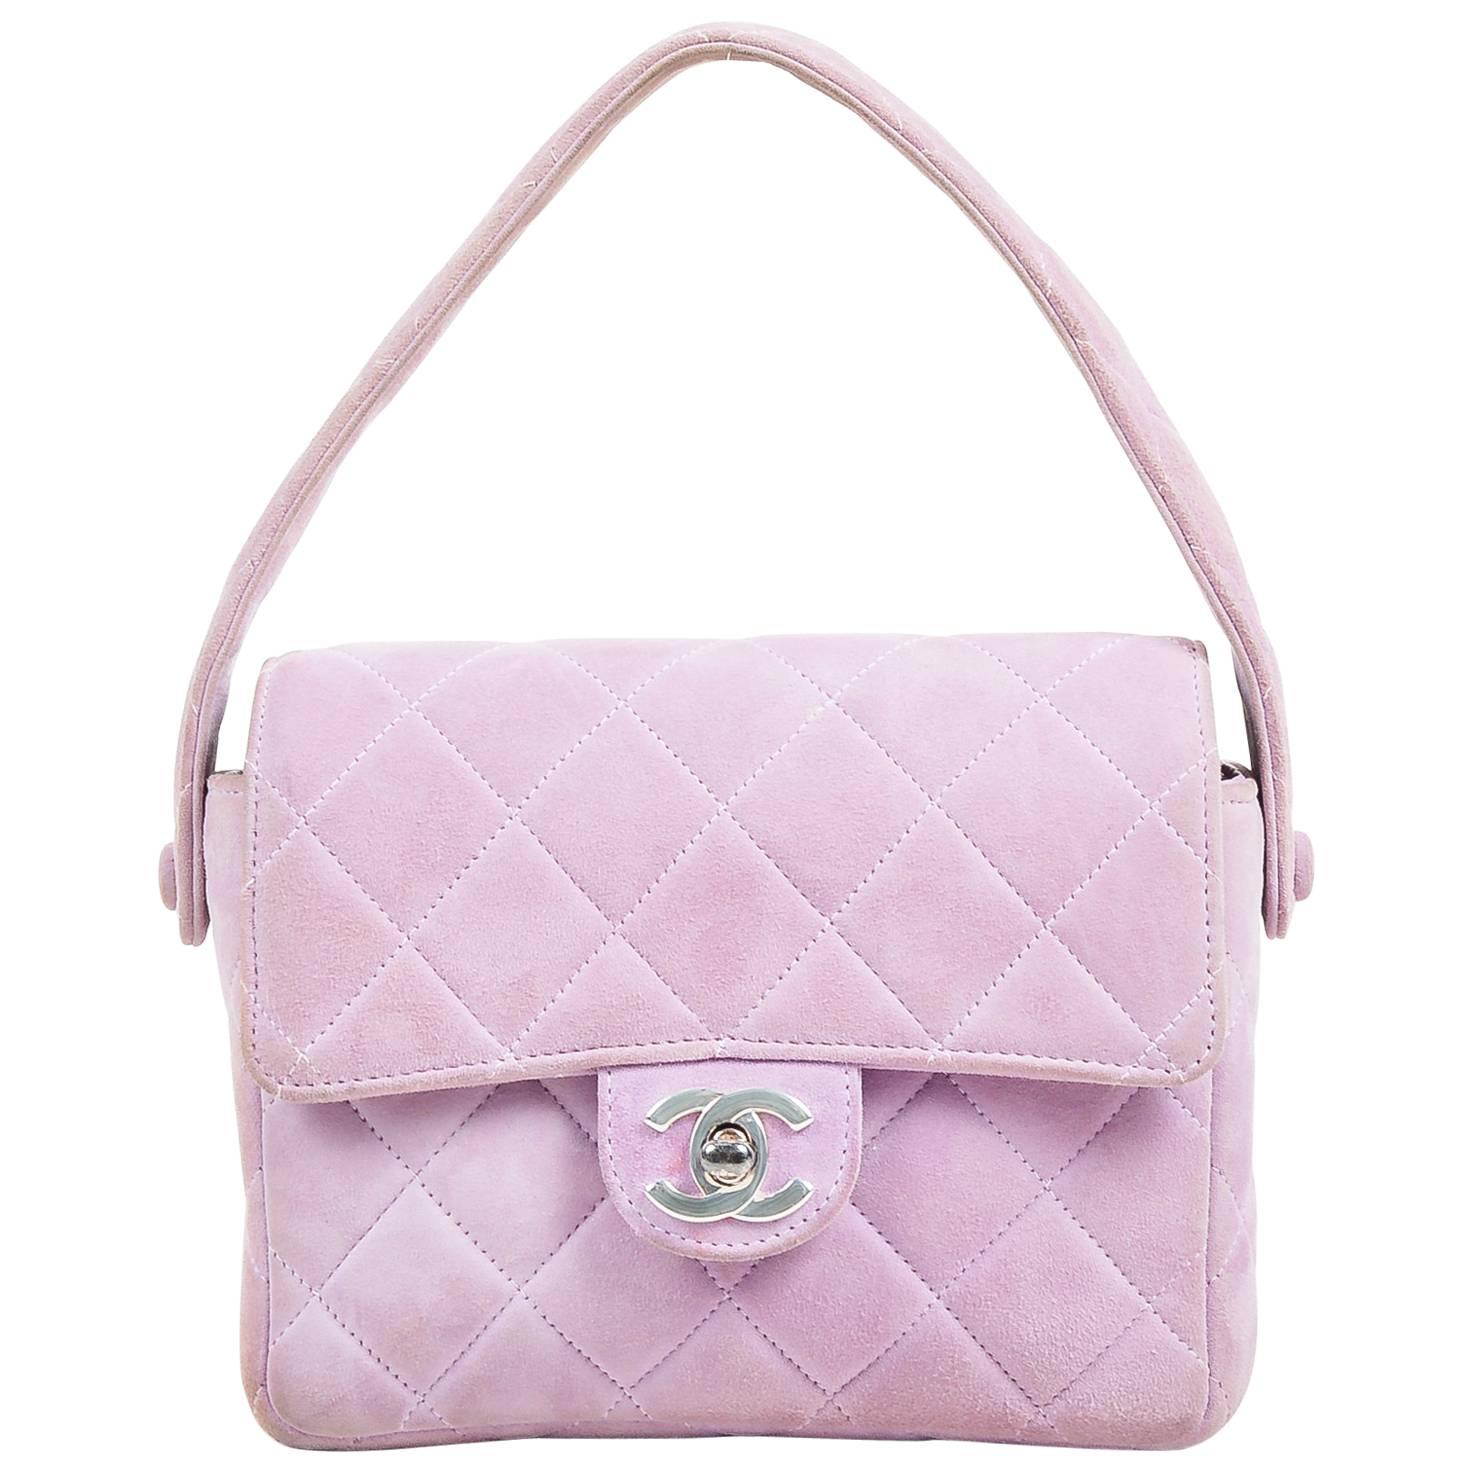 Chanel Lavender Purple Suede Quilted Turn Lock Mini Flap Purse Bag For Sale